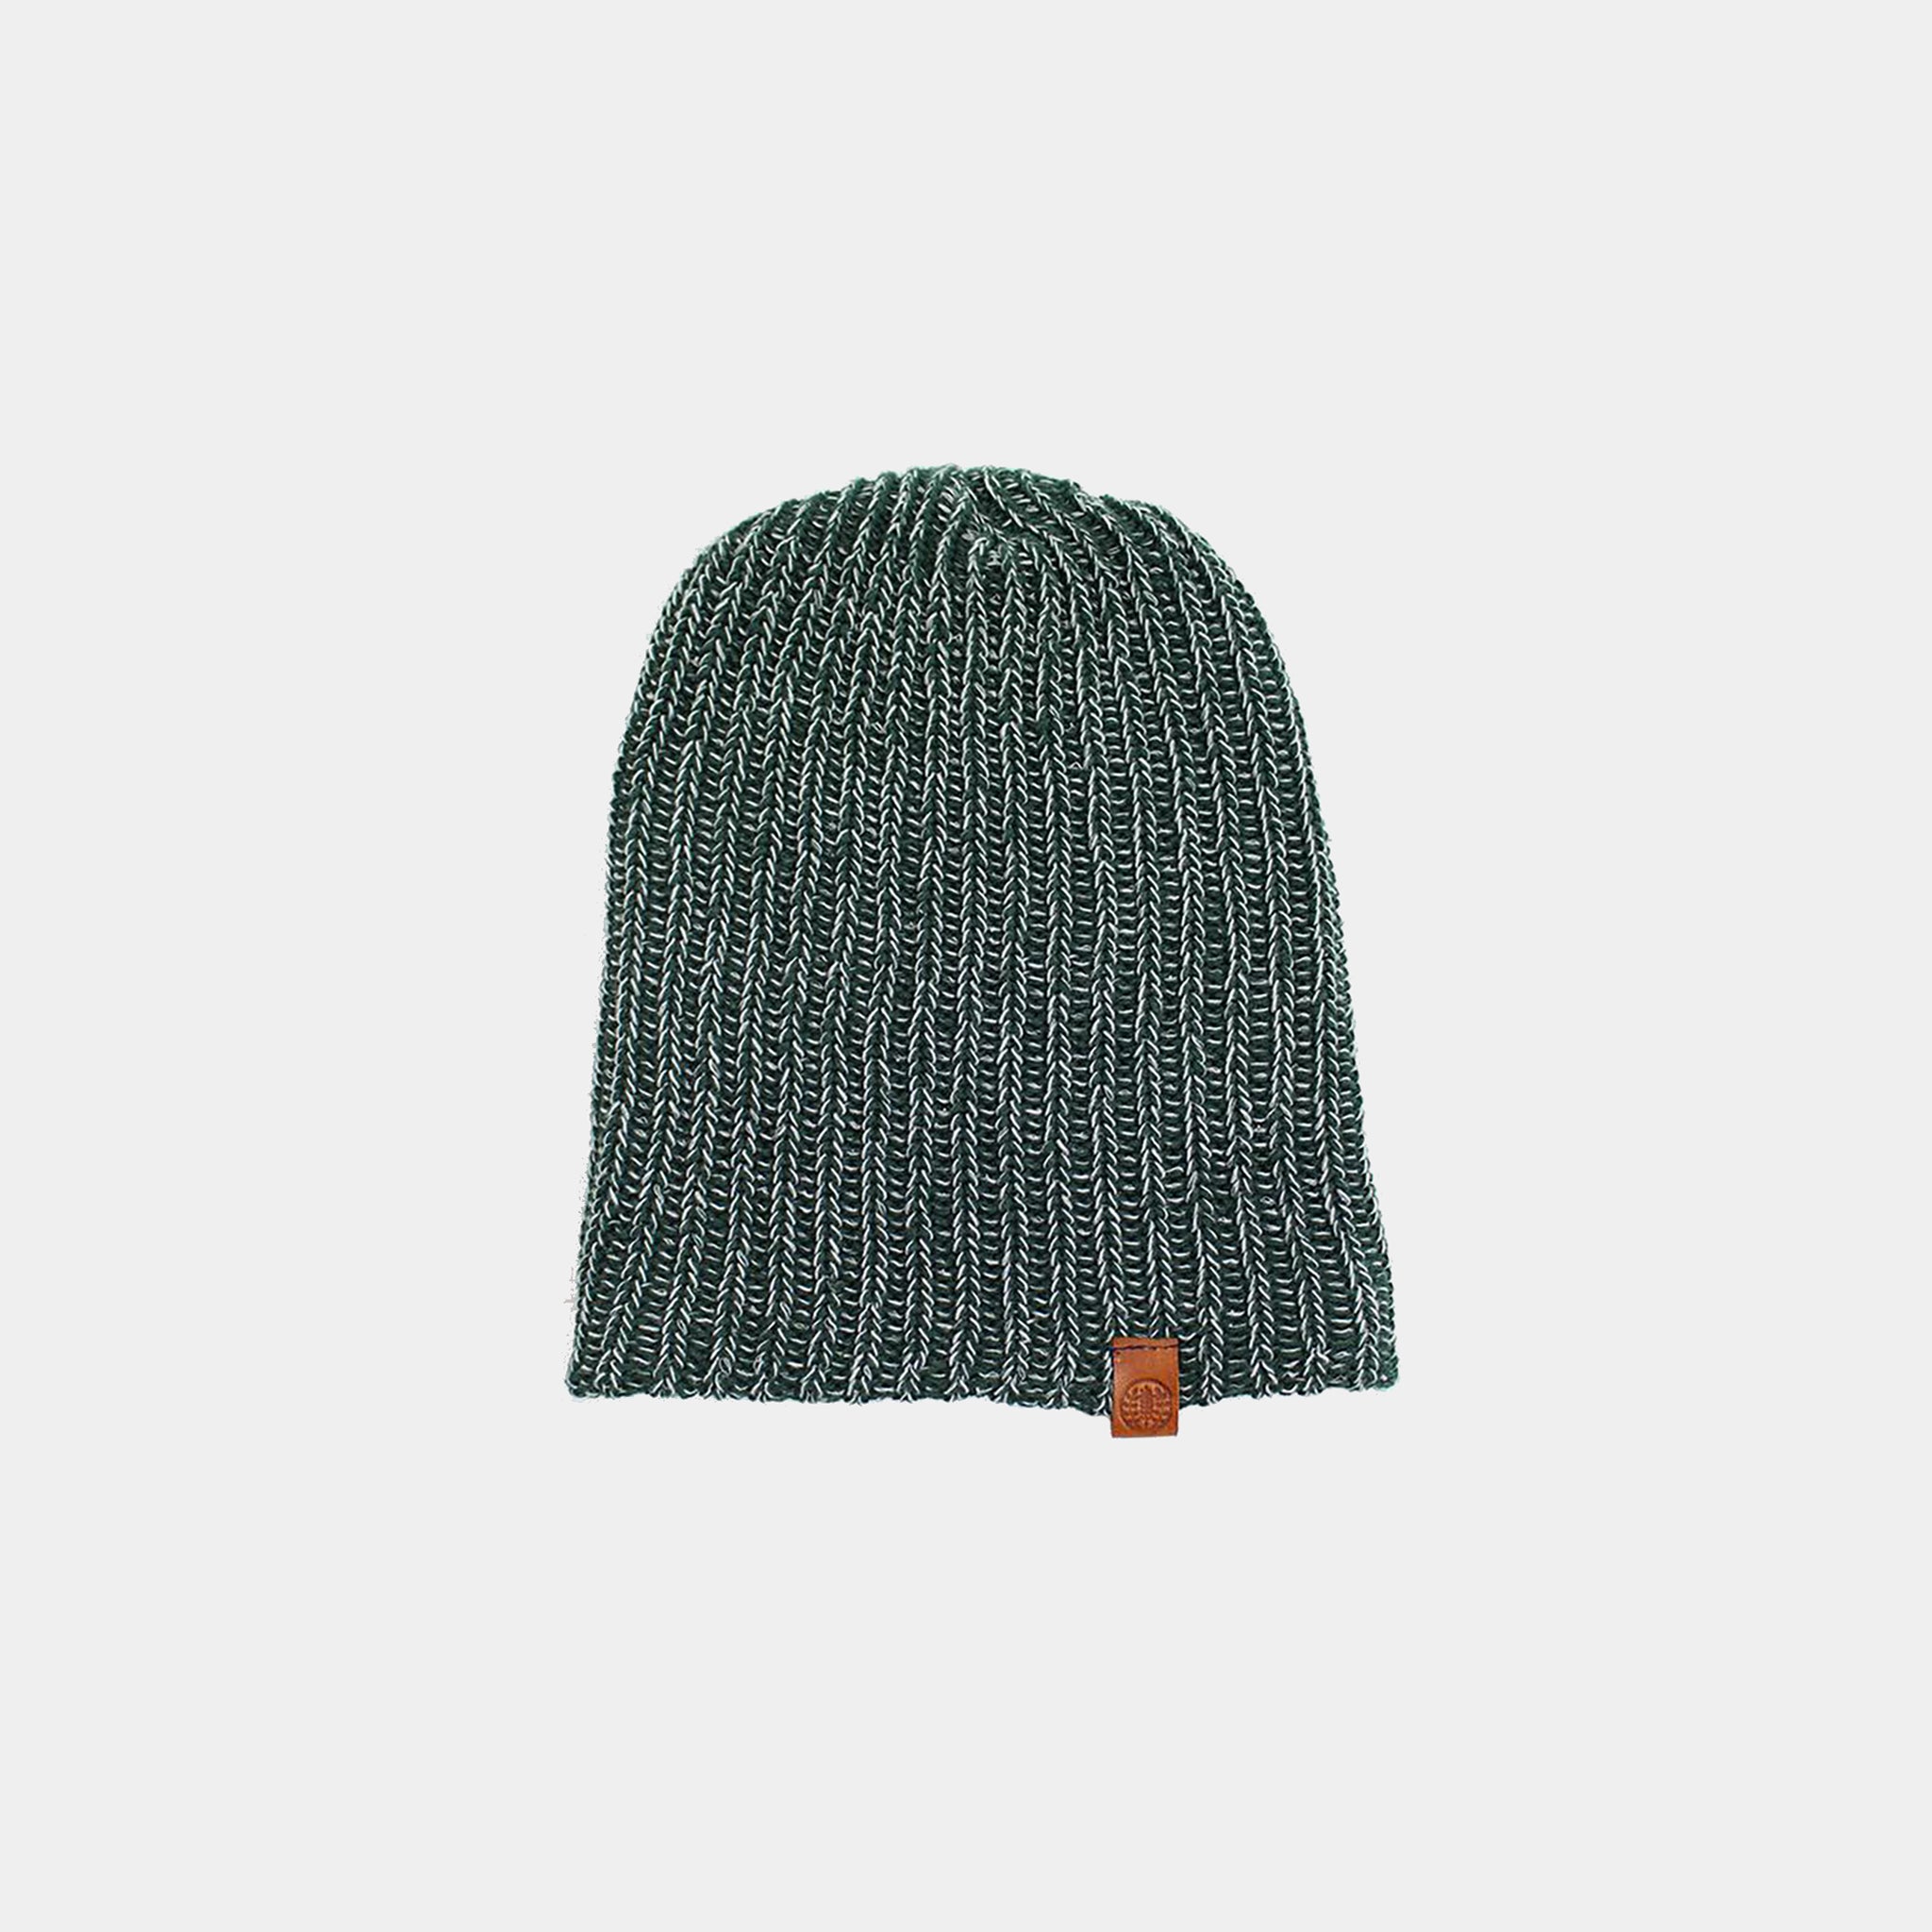 Marbled Knit Cap